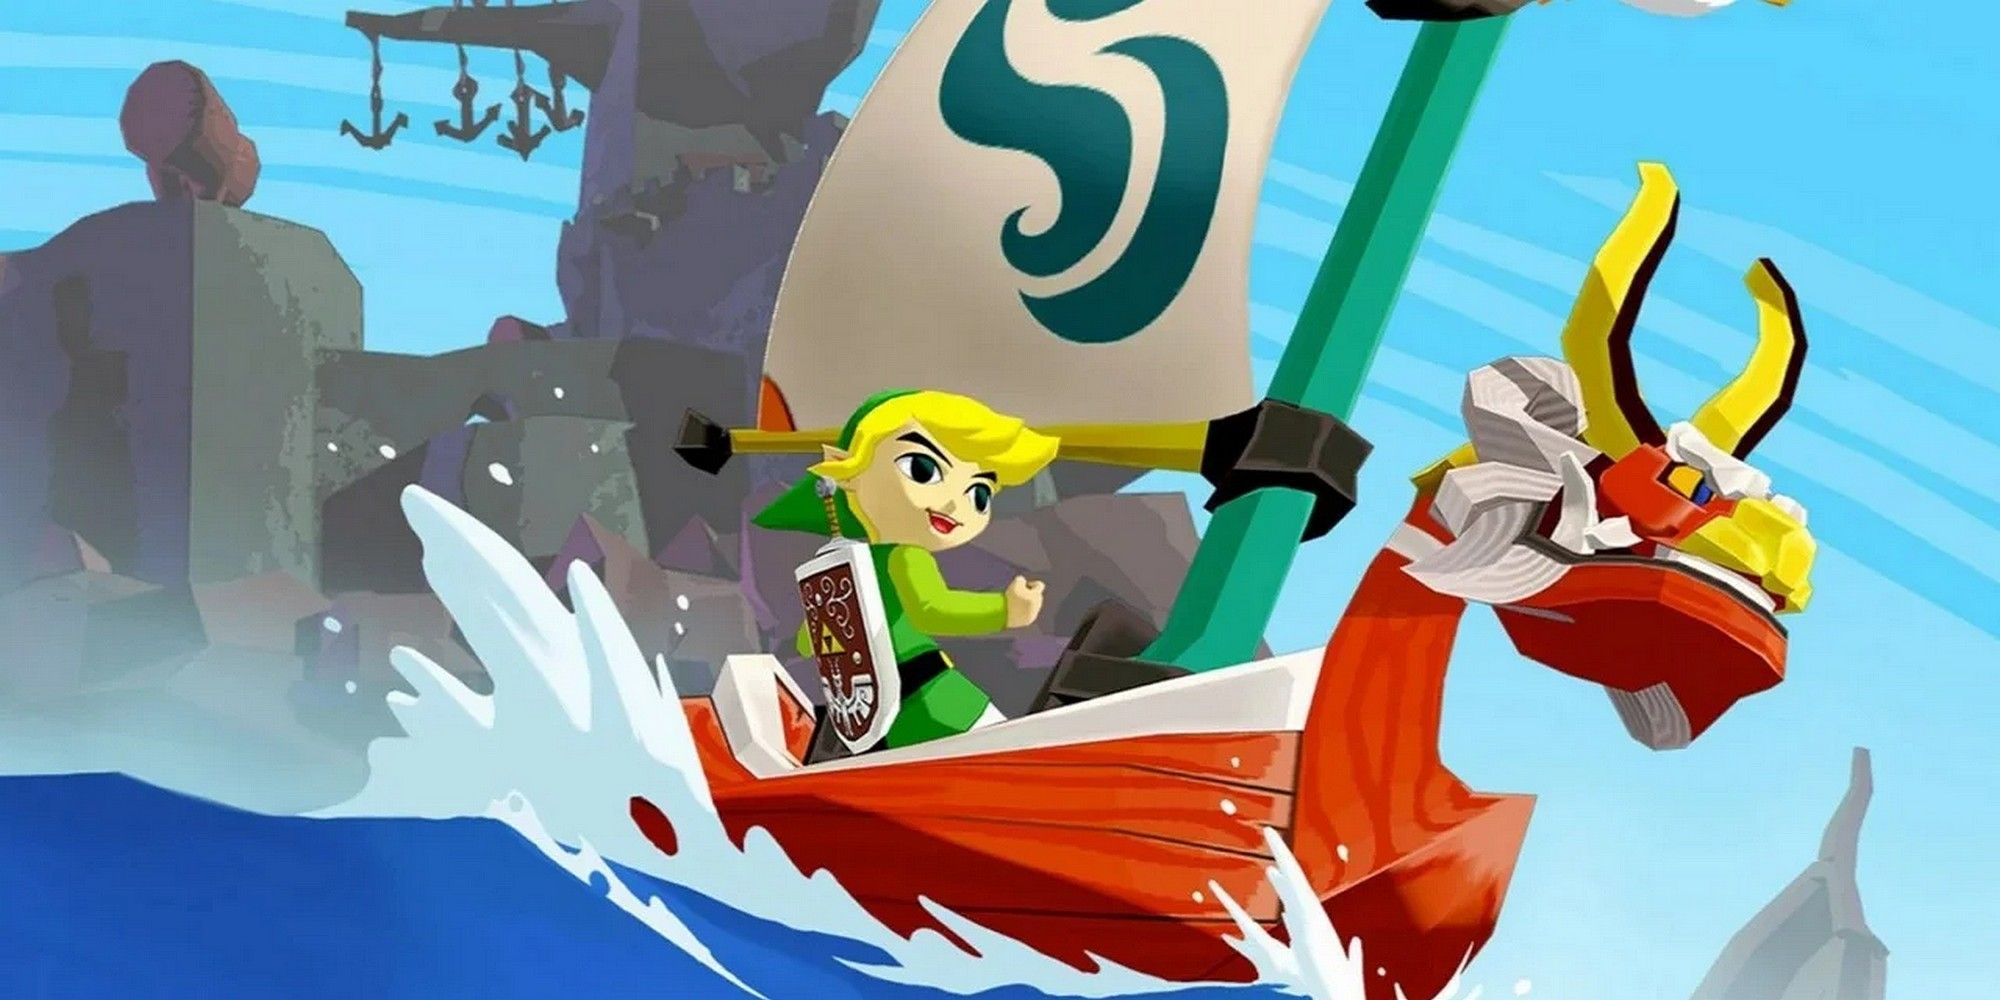 Link and the Red Lion King in The Legend of Zelda Wind Waker